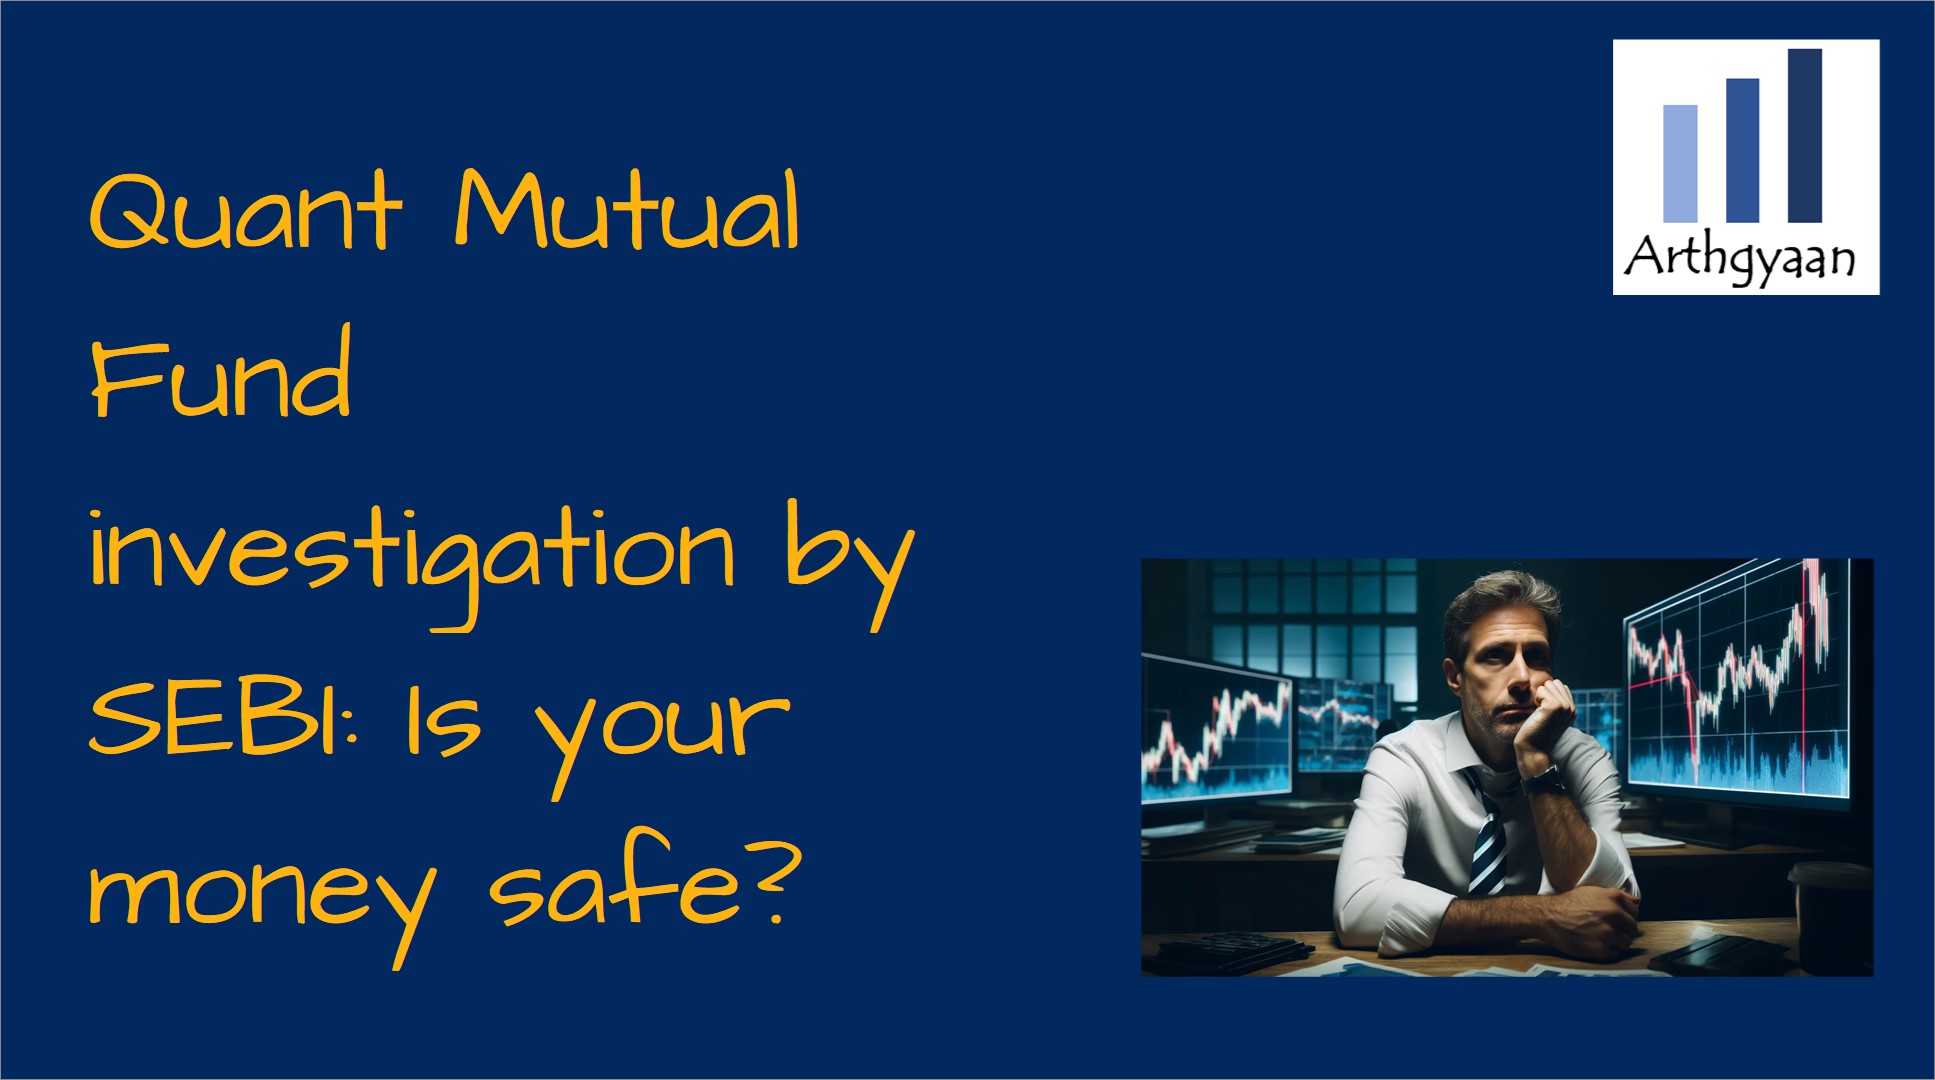 Quant Mutual Fund investigation by SEBI: Is your money safe?